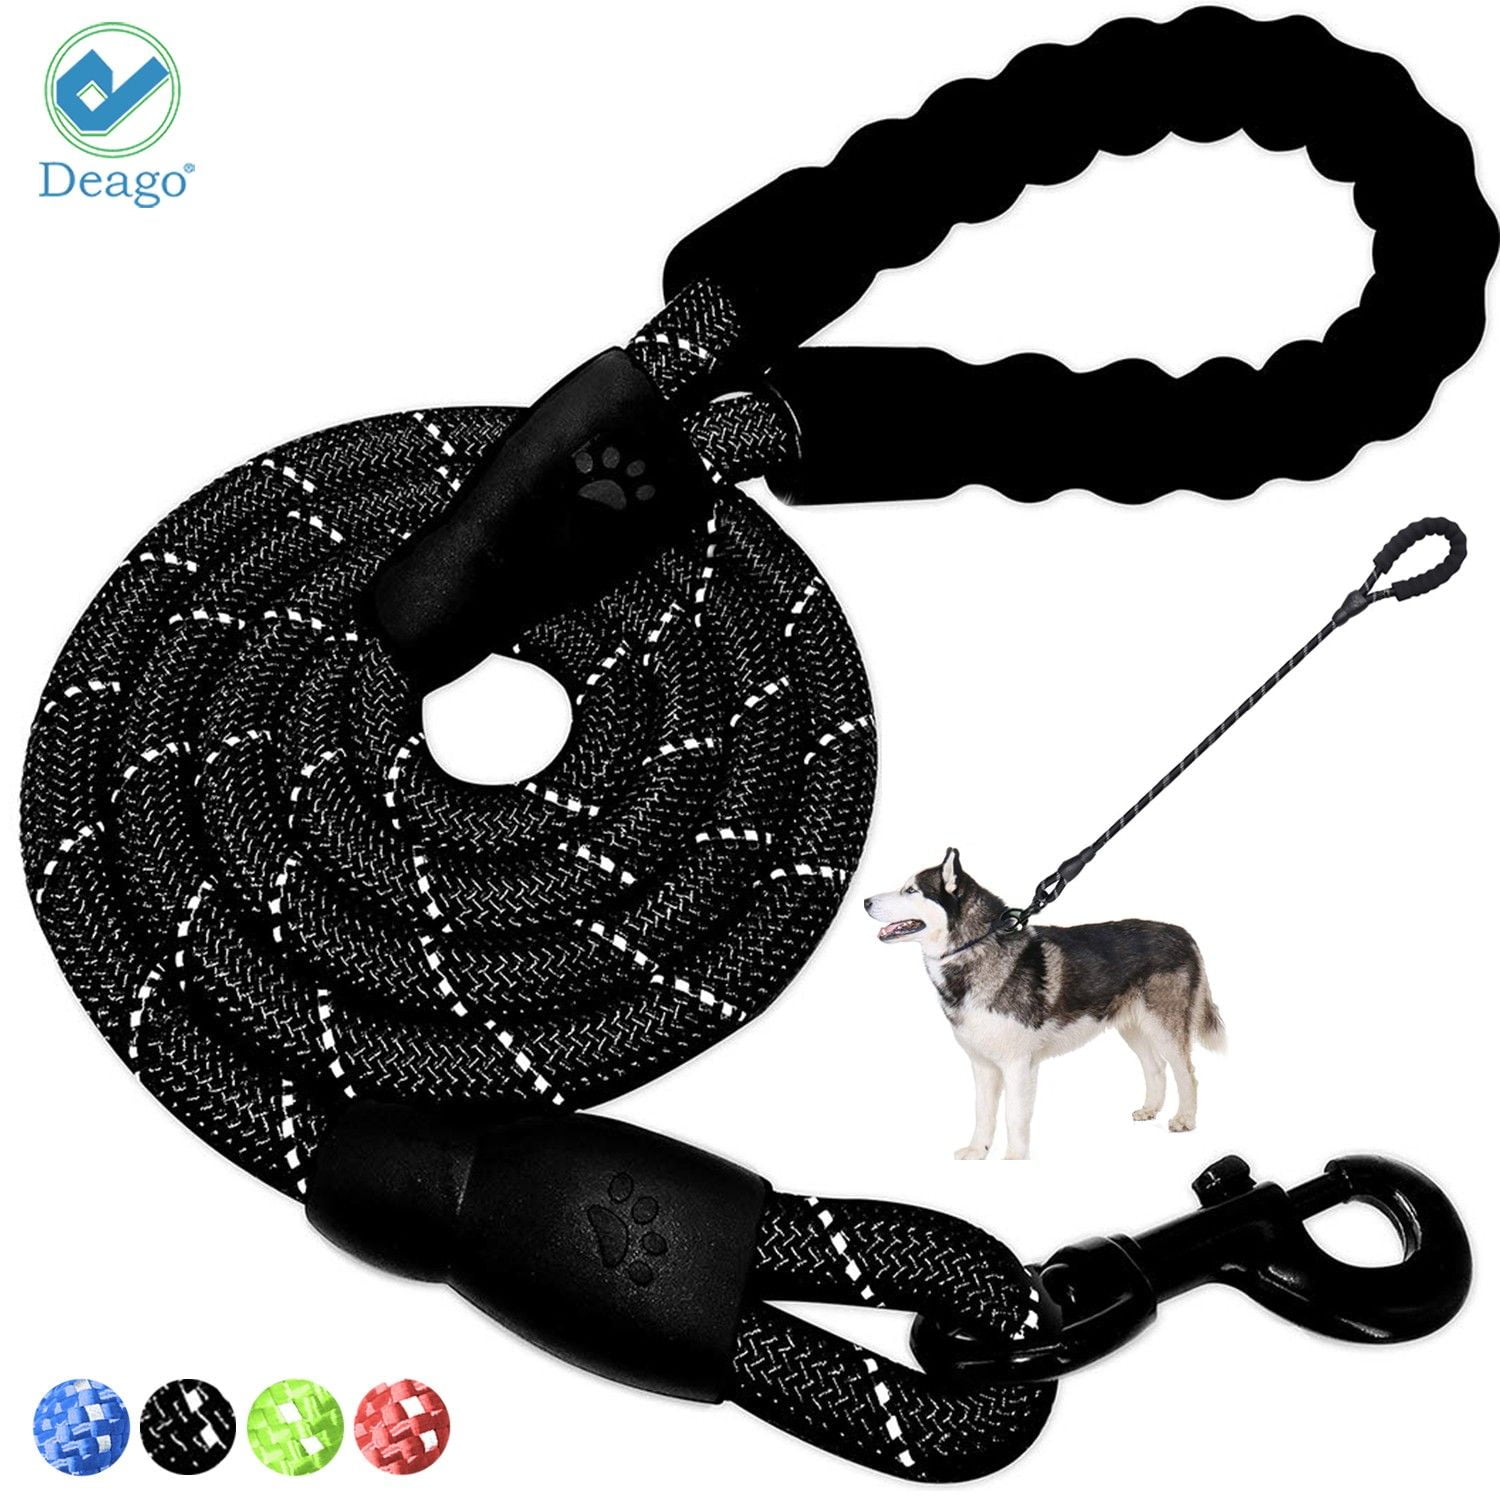 6ft No Pull Strong Durable Nylon Braided Rope for Running Camping Play Walking Small Medium Large Dogs Leash Slip Lead Dog Training Leash Black 